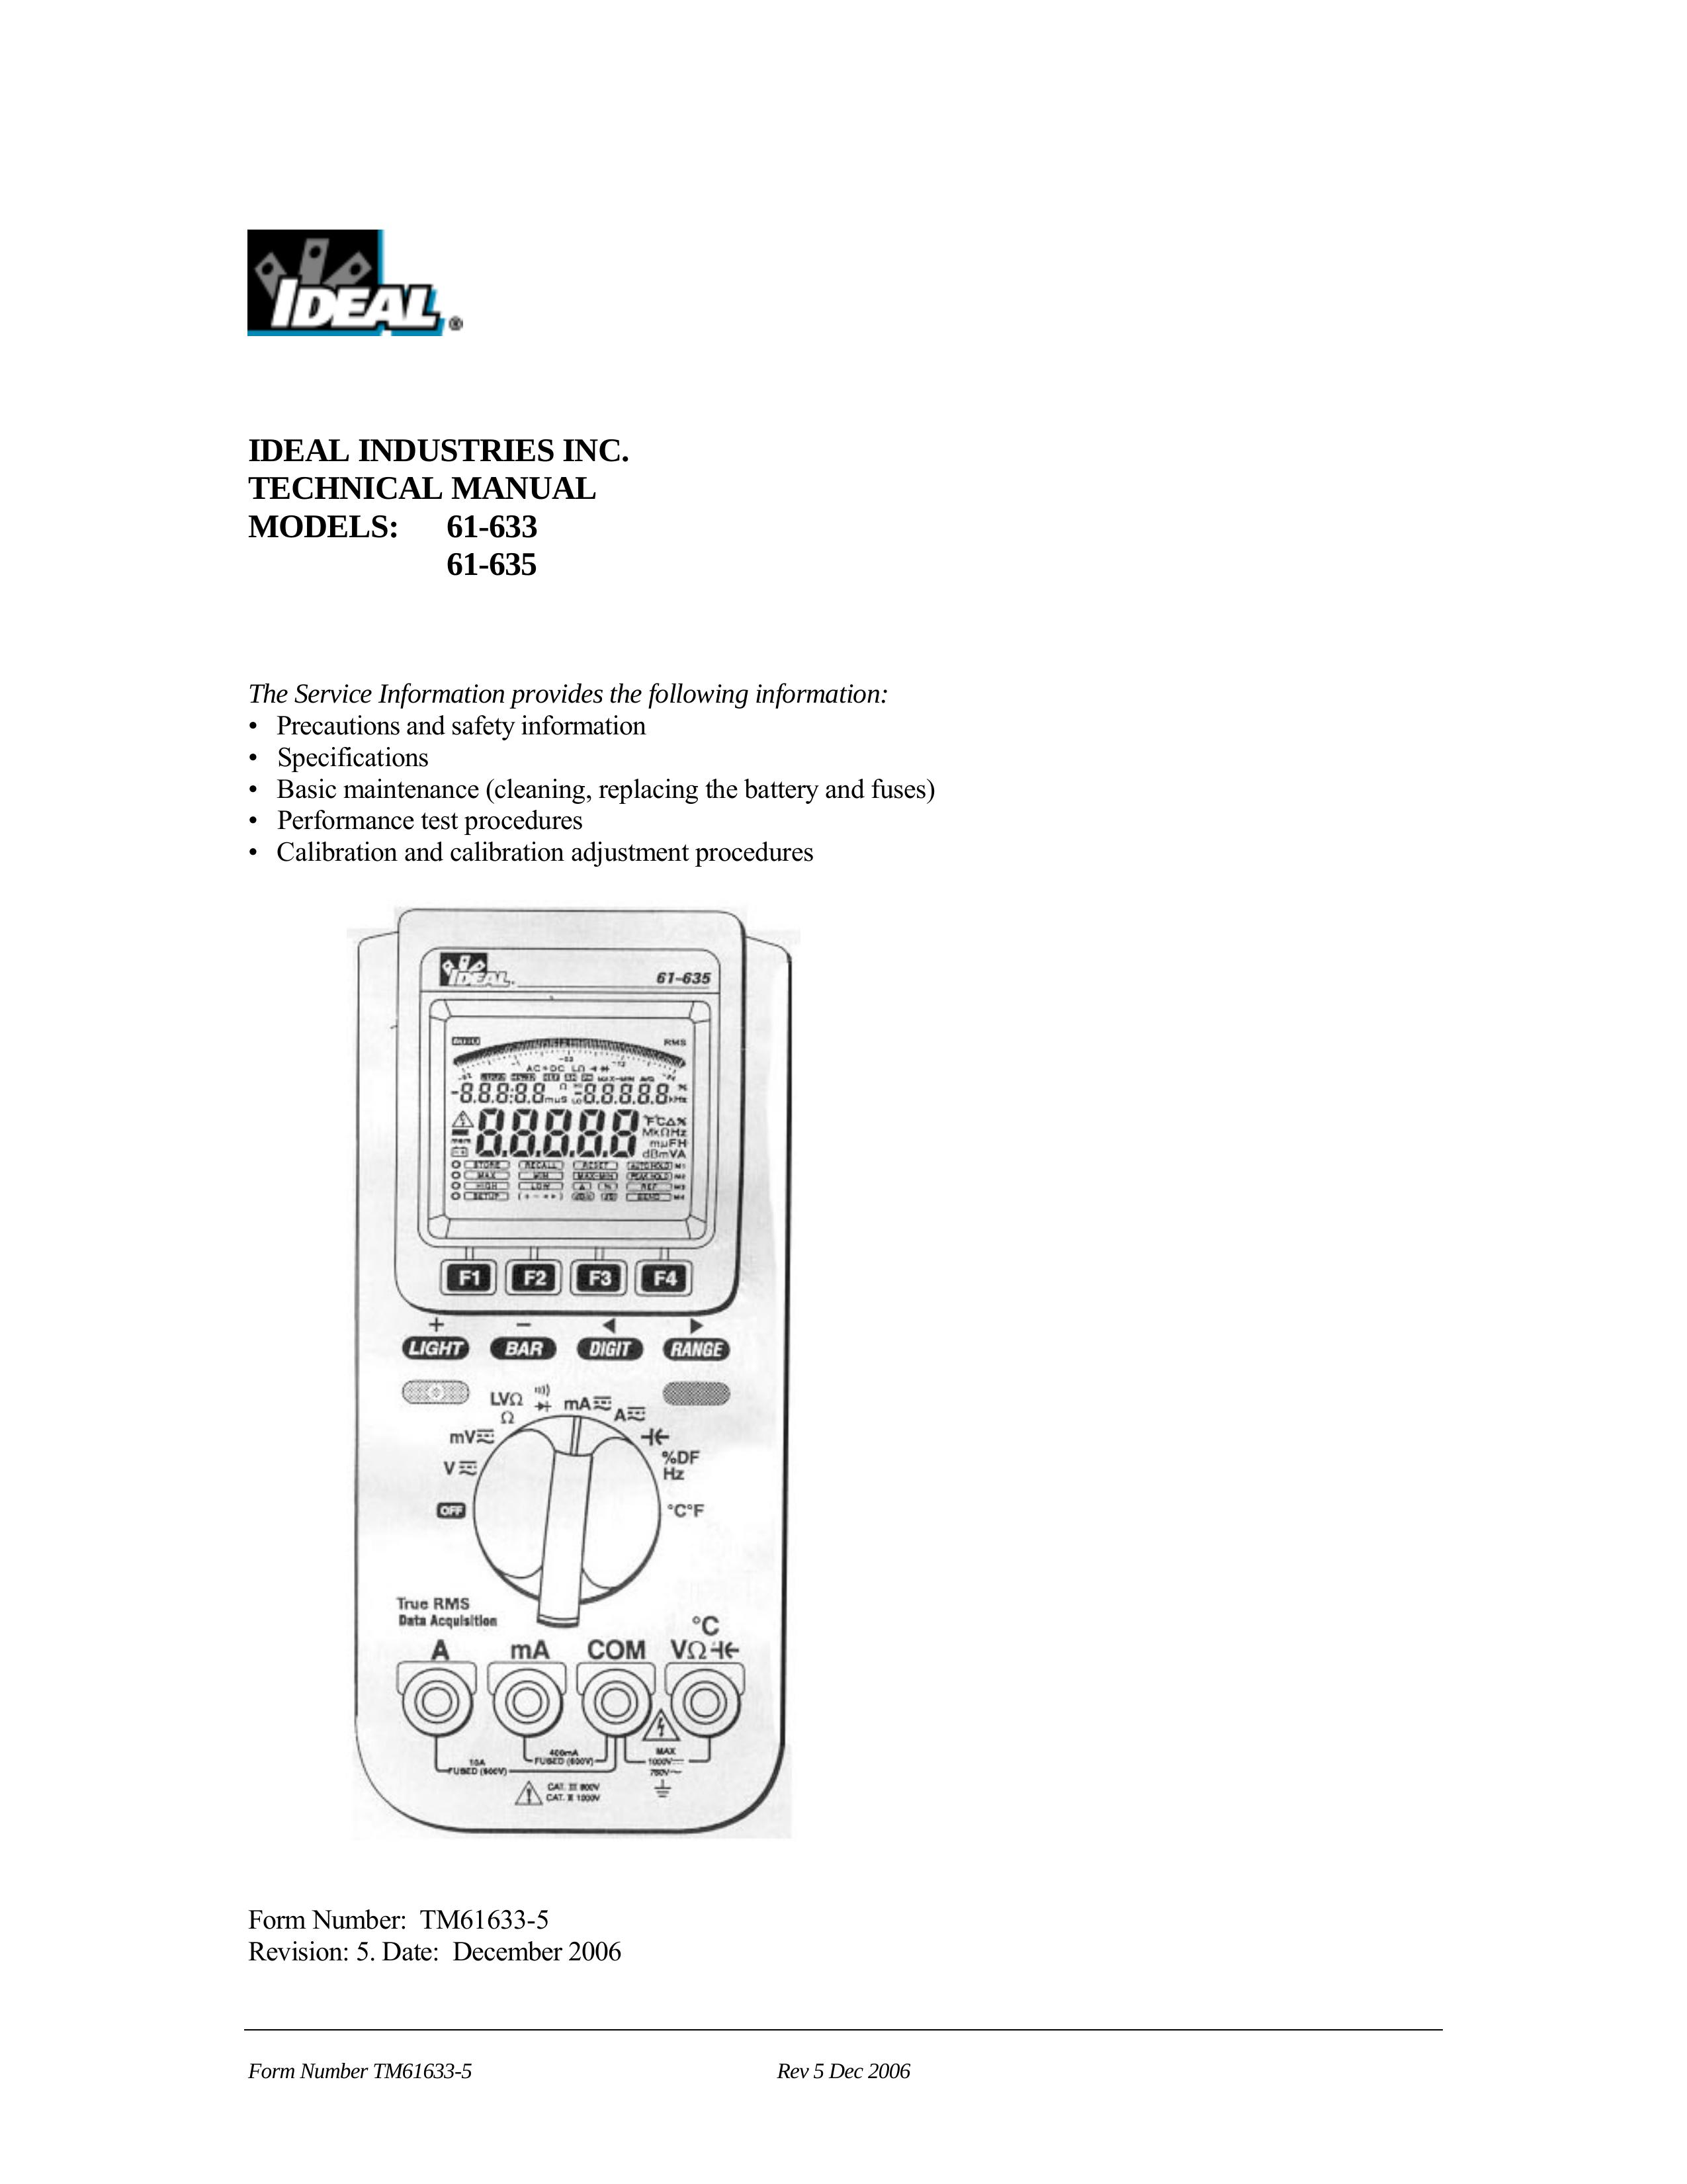 IDEAL INDUSTRIES 61-635 Thermometer User Manual